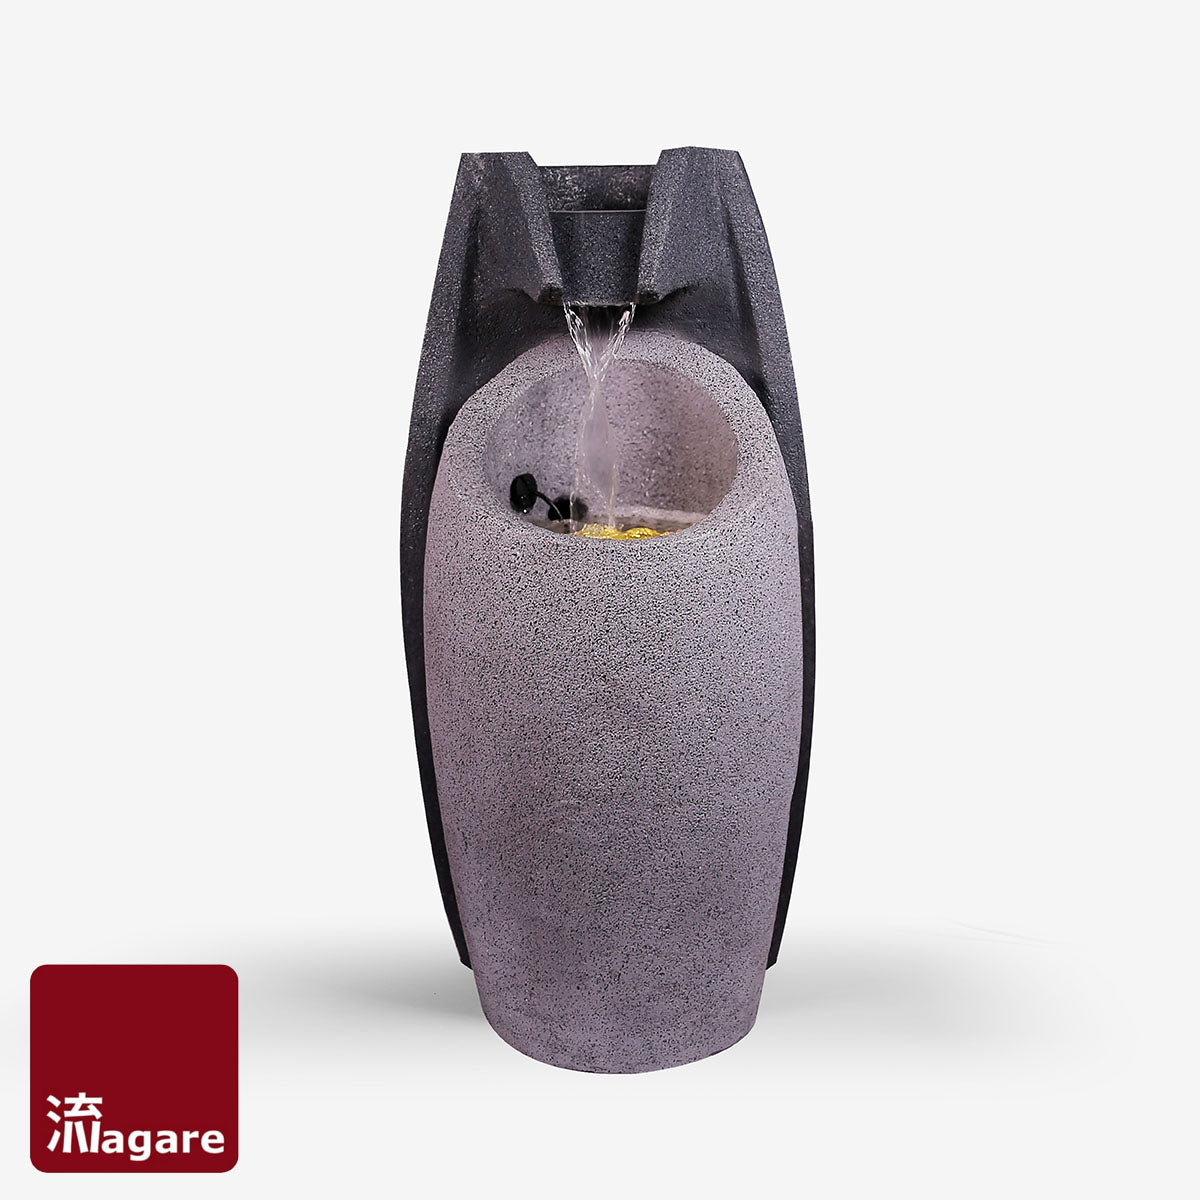 This impressive feature is symbolic of wealth and good fortune, with its inward flow of water which accumulates into a wellspring of success. WEALTH is a floor standing water fountain that is suitable for both indoor and outdoor use.